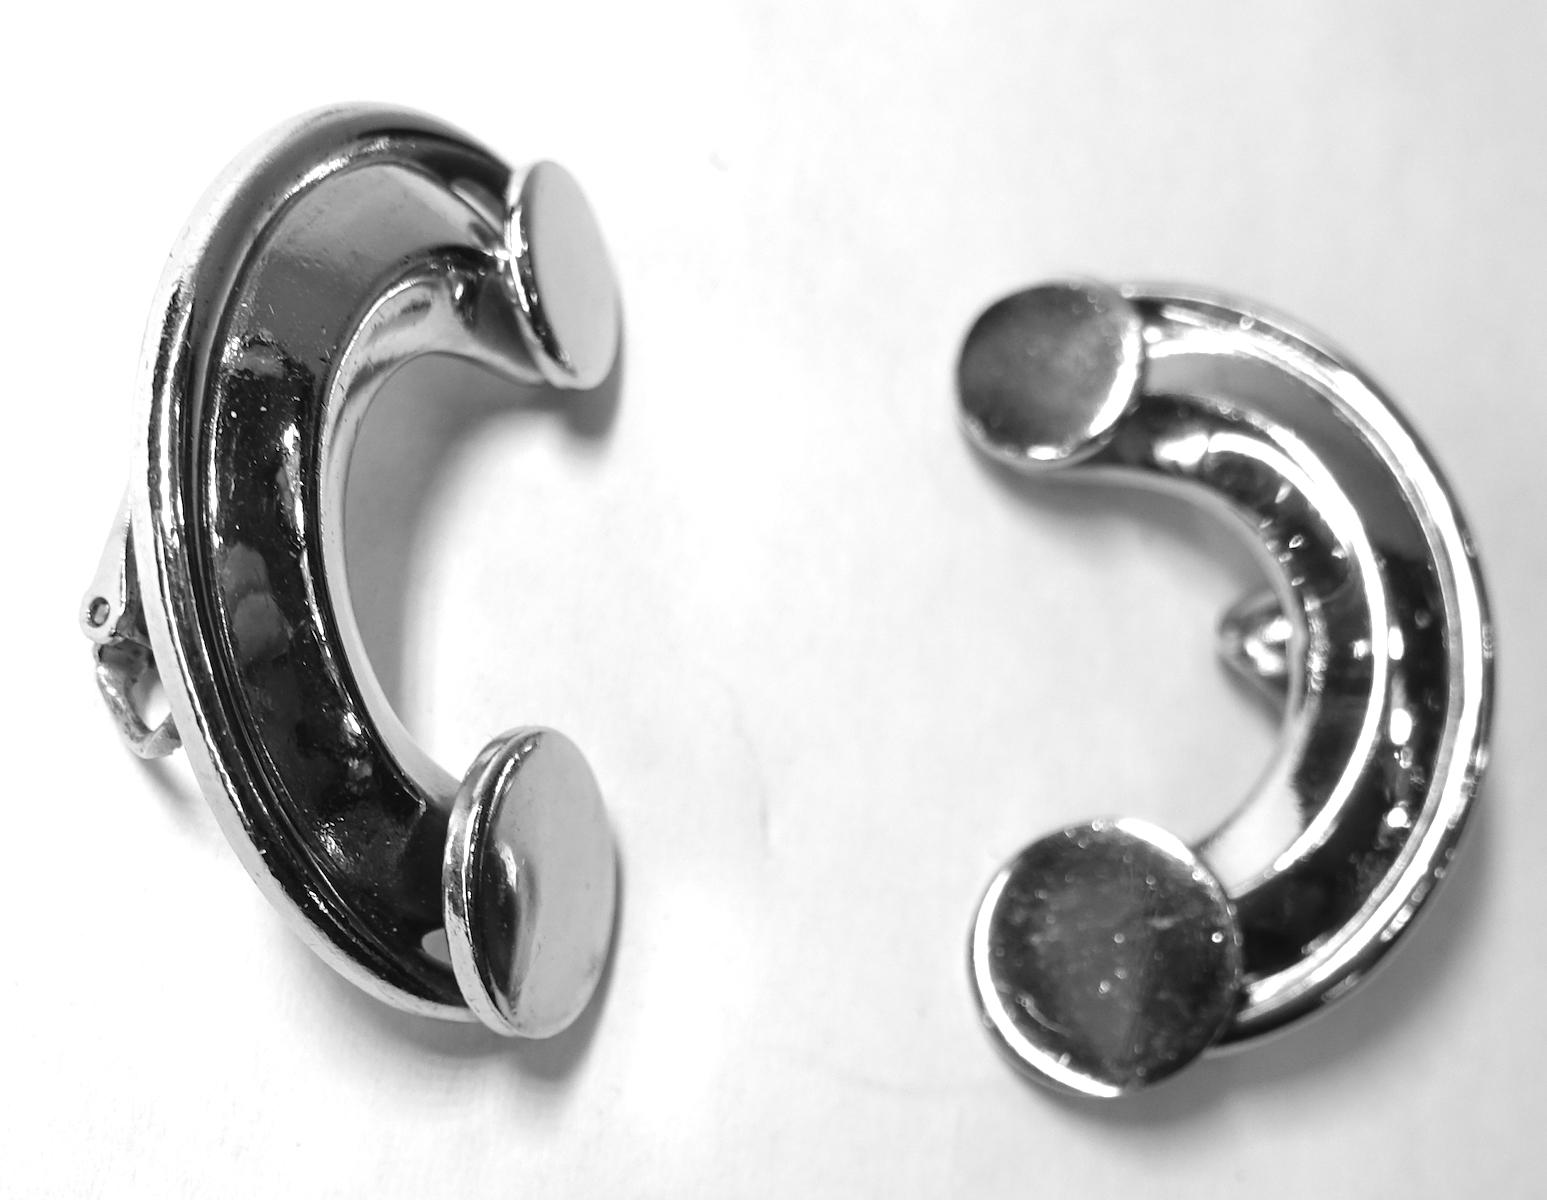 These vintage signed Bartek earrings are design with a half moon in a silver tone setting.  These clip earrings measure 1-5/8” x 1” and are signed “Bartek”.  They are in excellent condition.